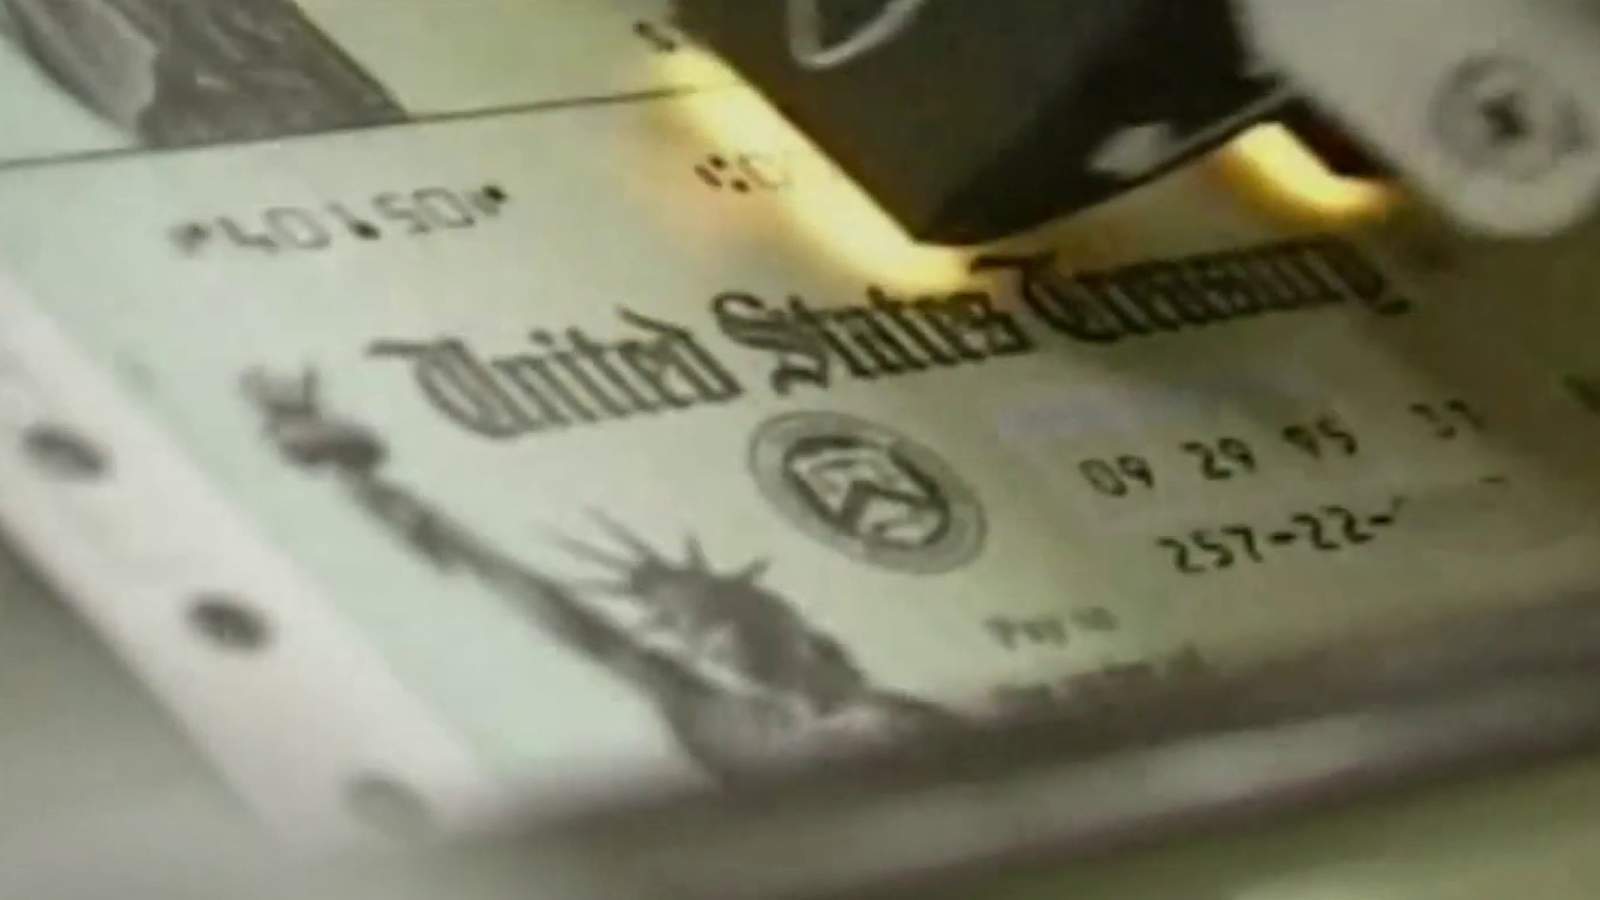 Car wash worker returns stimulus check discovered in trash